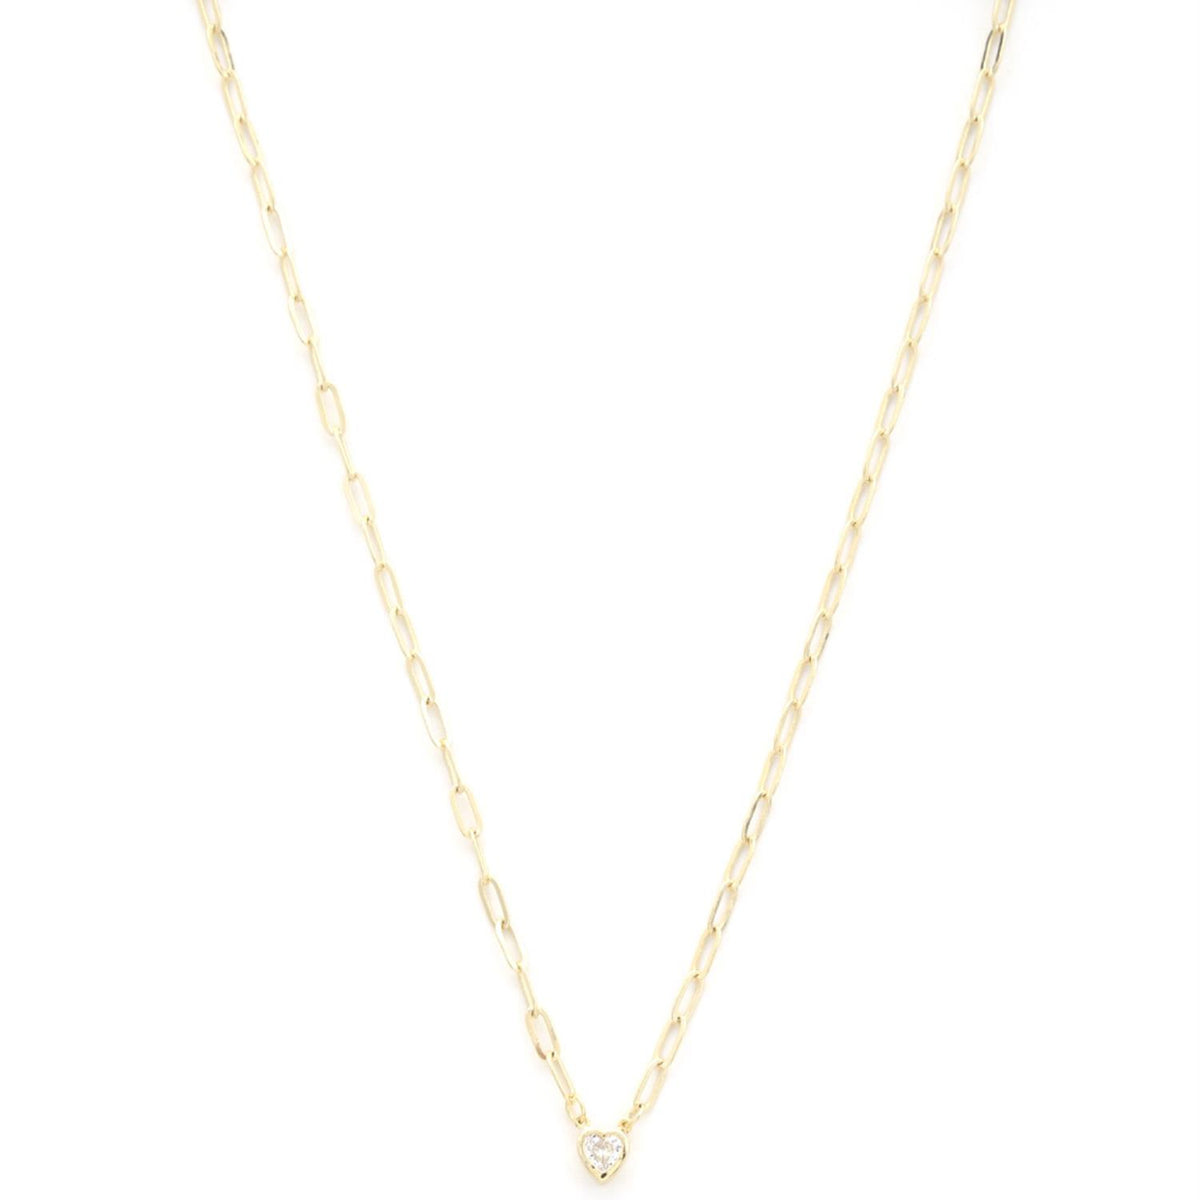 Dainty Heart Charm Oval Link Metal Necklace